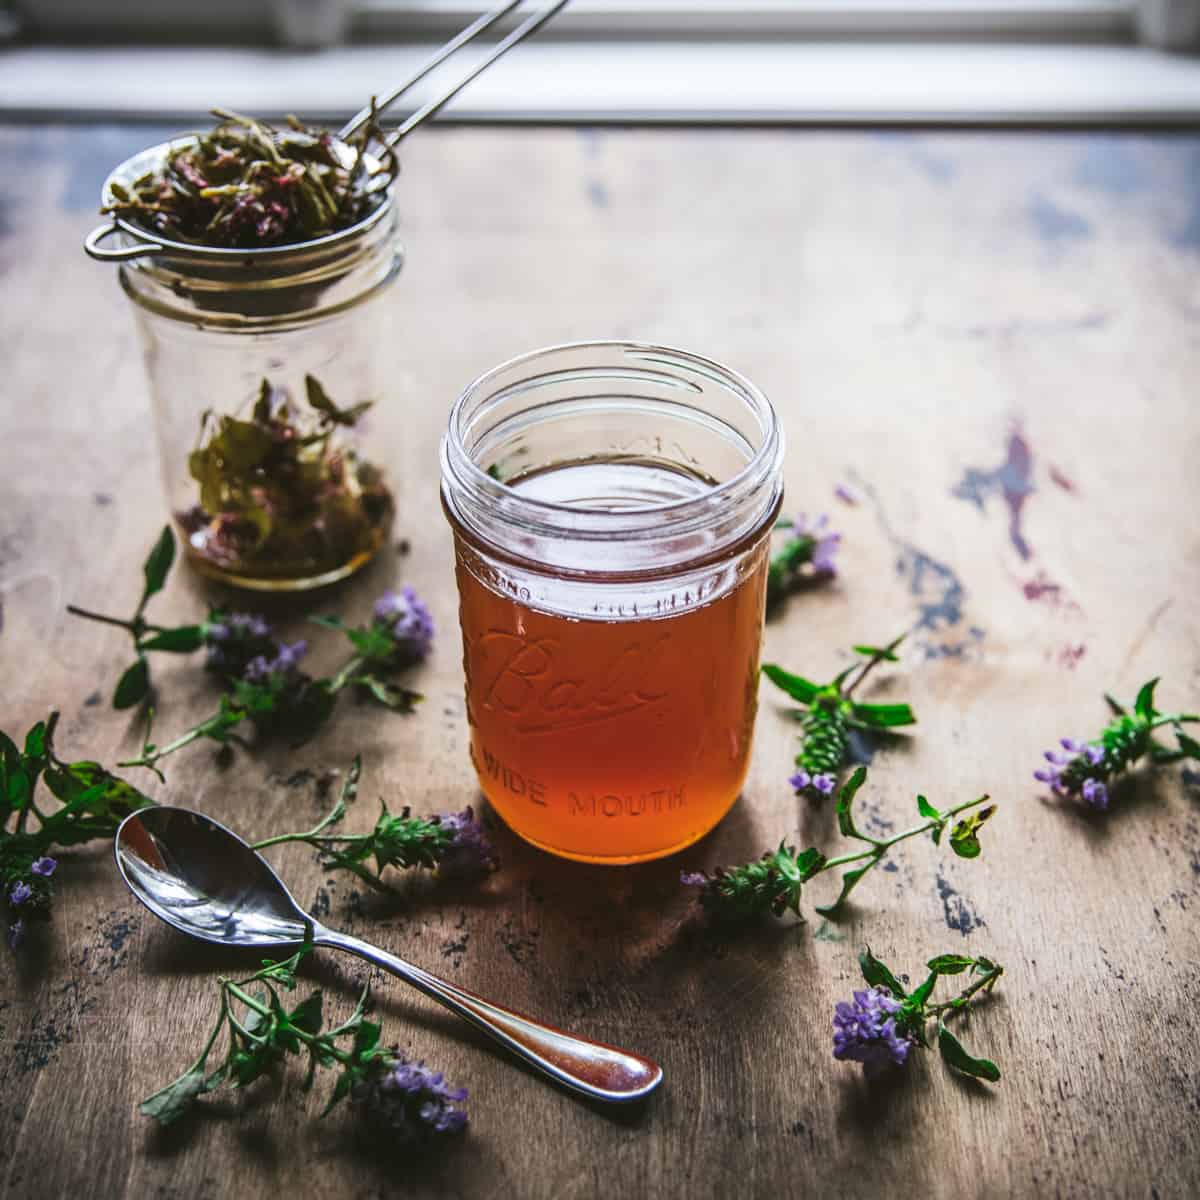 Self-Heal Oxymel: Old Fashioned Remedy for Immune Support